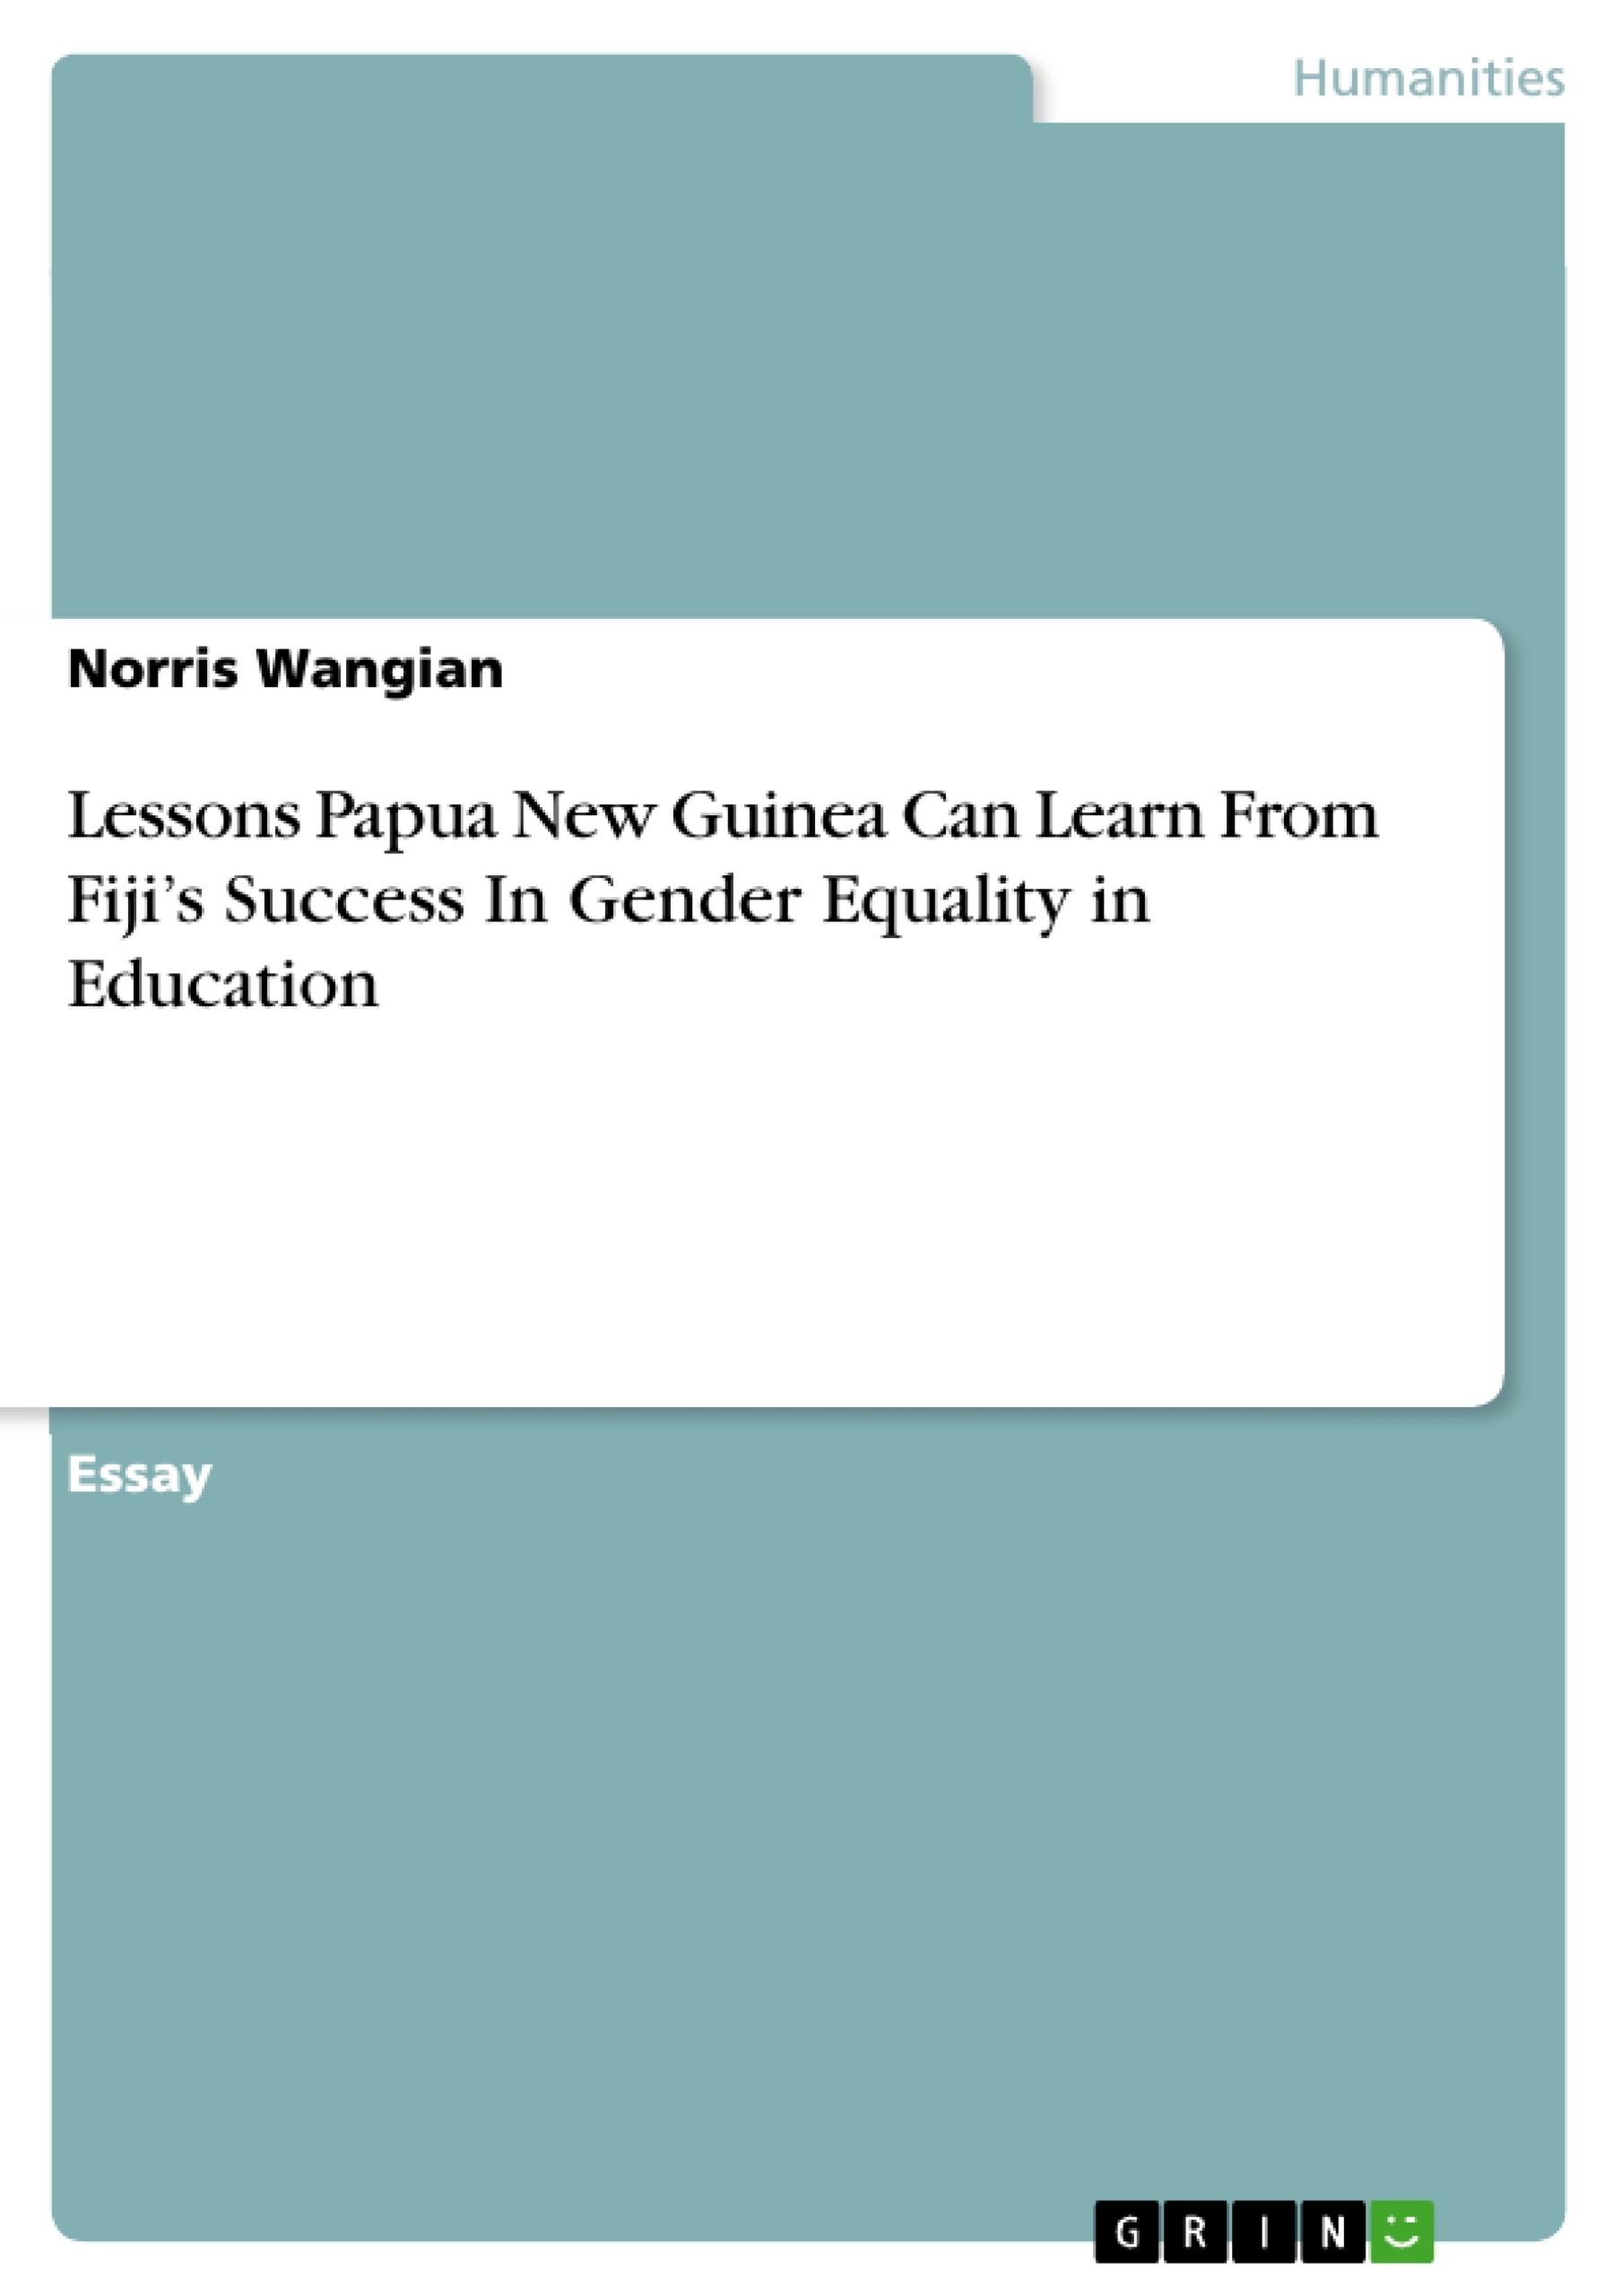 Titre: Lessons Papua New Guinea Can Learn From Fiji’s Success In Gender Equality in Education